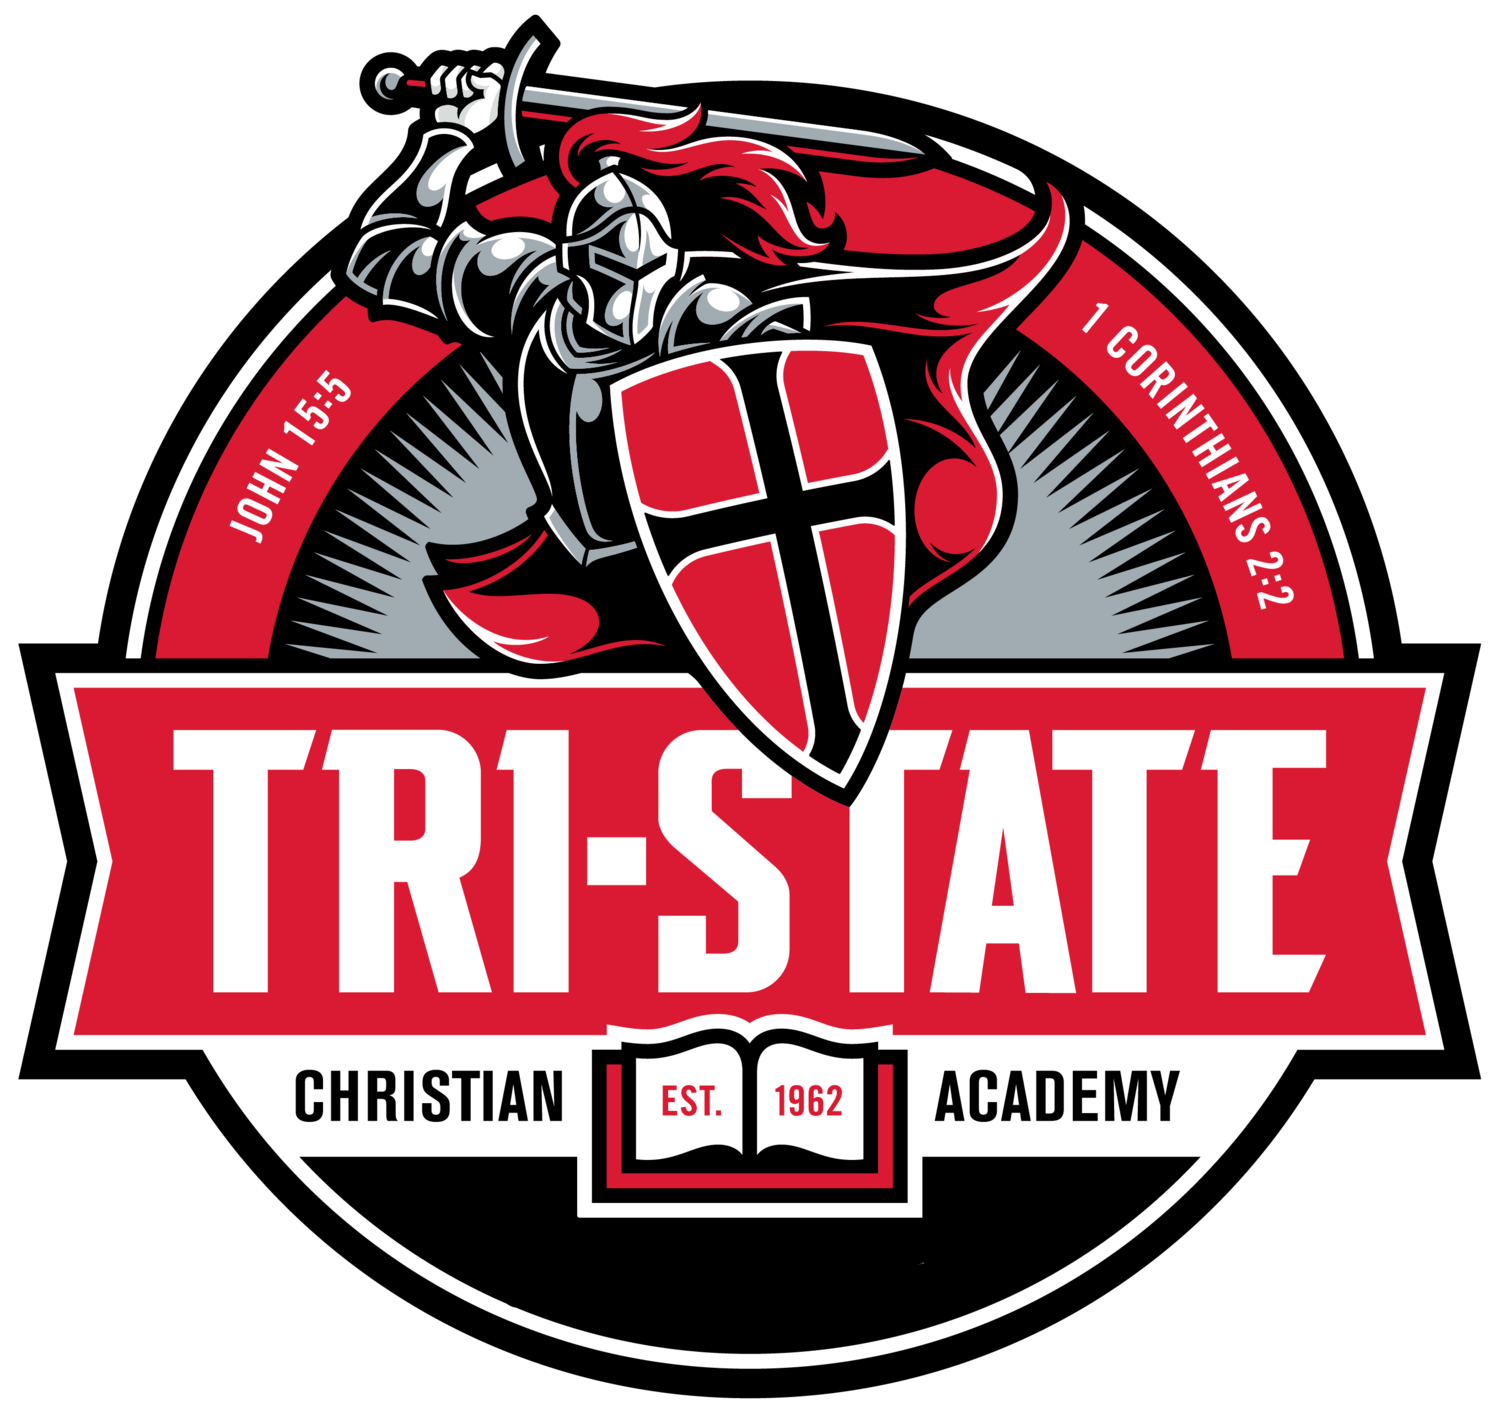 Tri-State Christian Academy | ACSI Christian Academy located in Elkton, MD